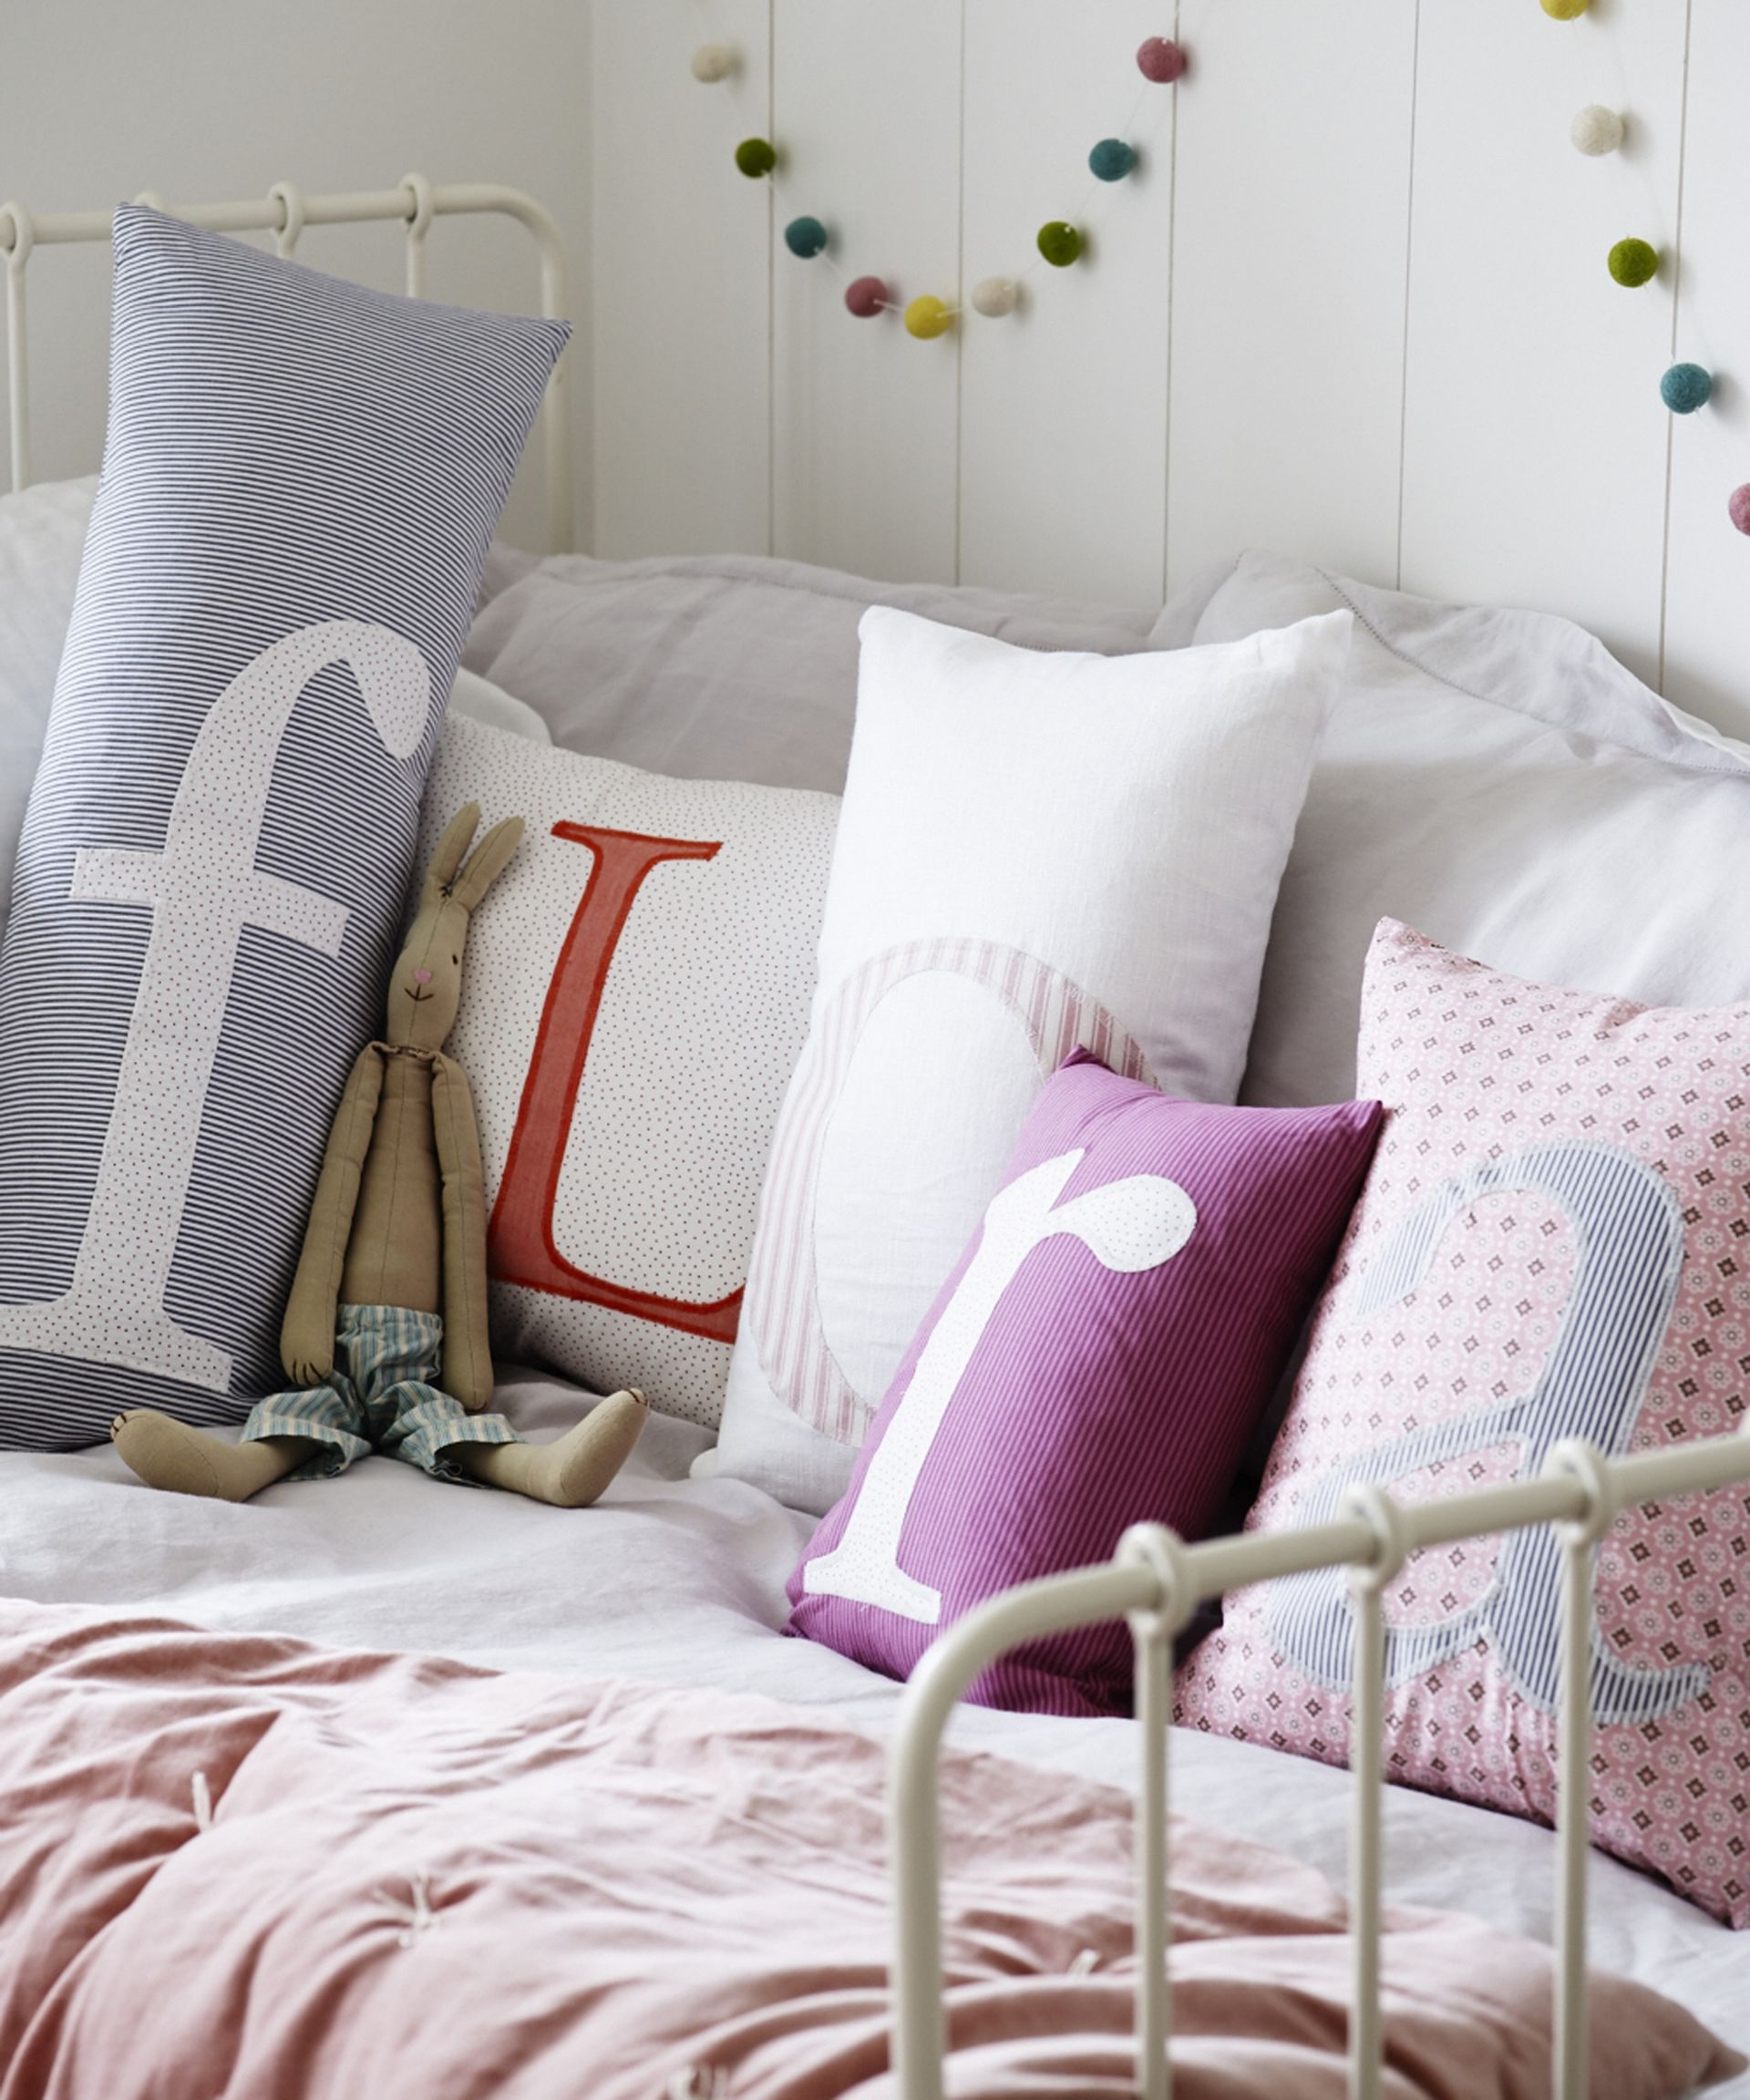 <p>                     For any age, kids’ rooms that make the space feel unique are an instant win. Children enjoy seeing their name in lights, or even woven into their pillow – and new parents love it too.                   </p>                                      <p>                     ‘For a personal touch, consider adding something monogrammed to the nursery, be it a wall decal, a decorative pillow nesting on your nursery glider, or a blanket,’ suggests Justin Segal, director of product and brand management at Storkcraft.                   </p>                                      <p>                     ‘Remember, the nursery is your very own calm, serene space to bond with your baby. Seeing your child’s initials monogrammed on something in the nursery is a nice, custom touch to make your special space feel even more personal.’                   </p>